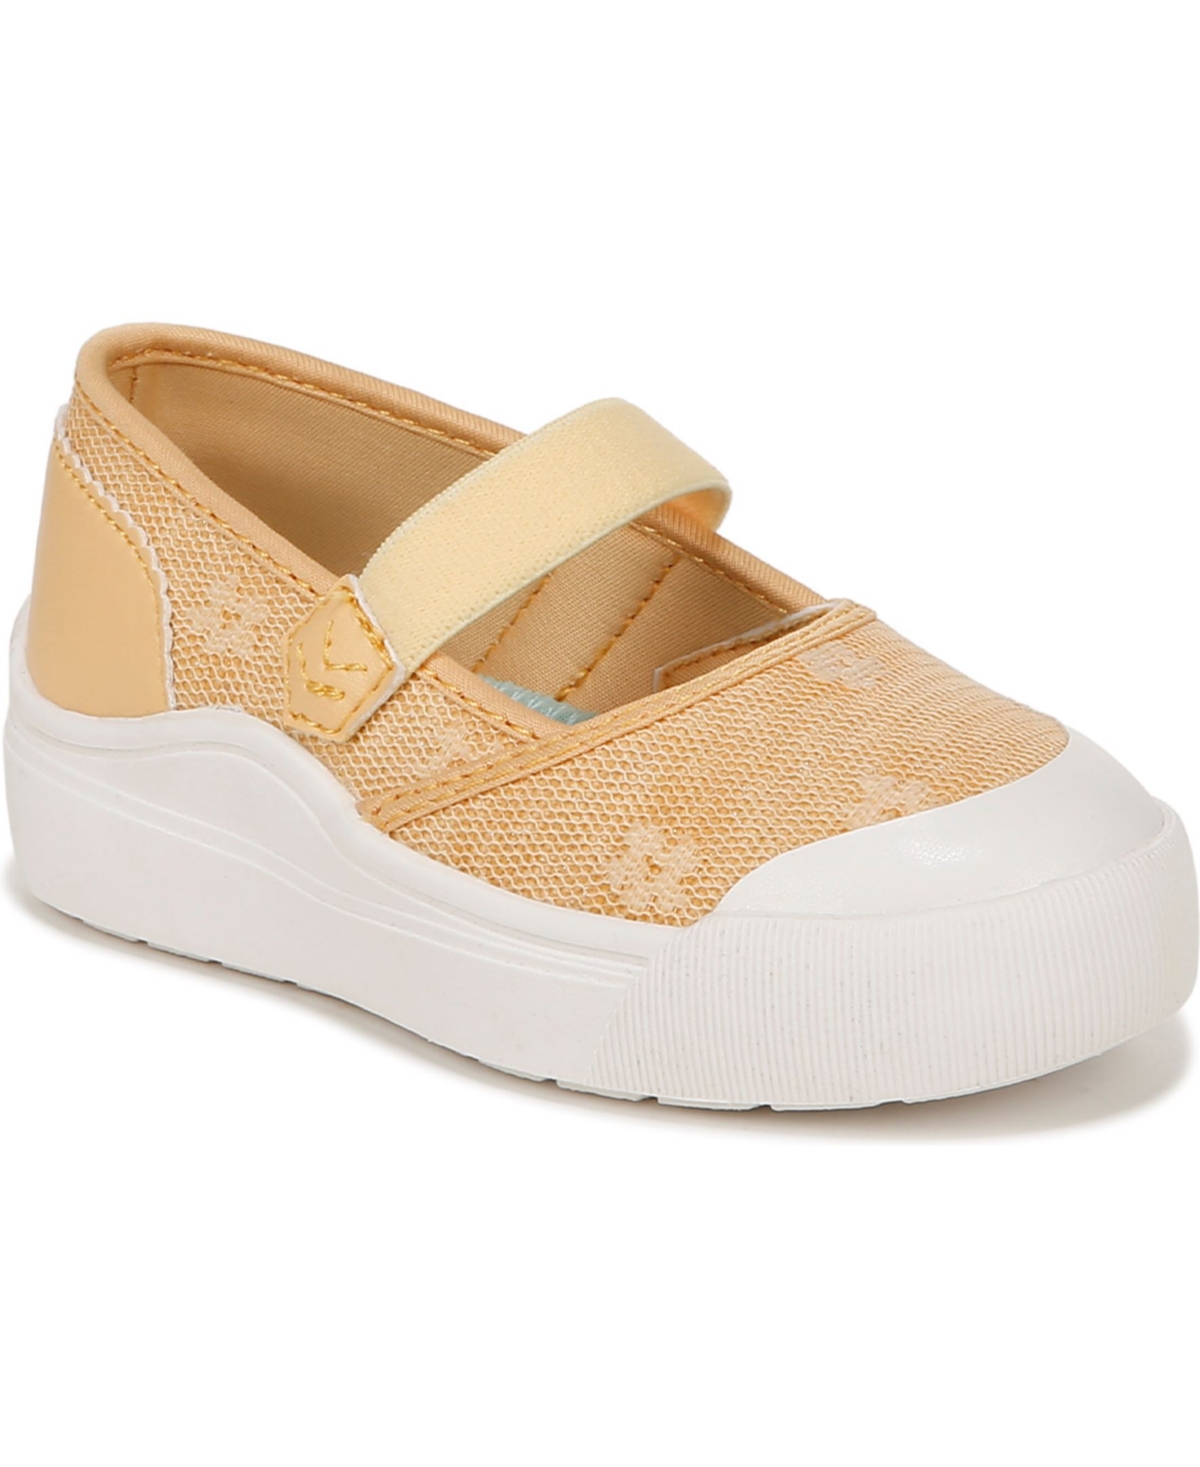 Time off Jane Slip-ons - Golden Yellow